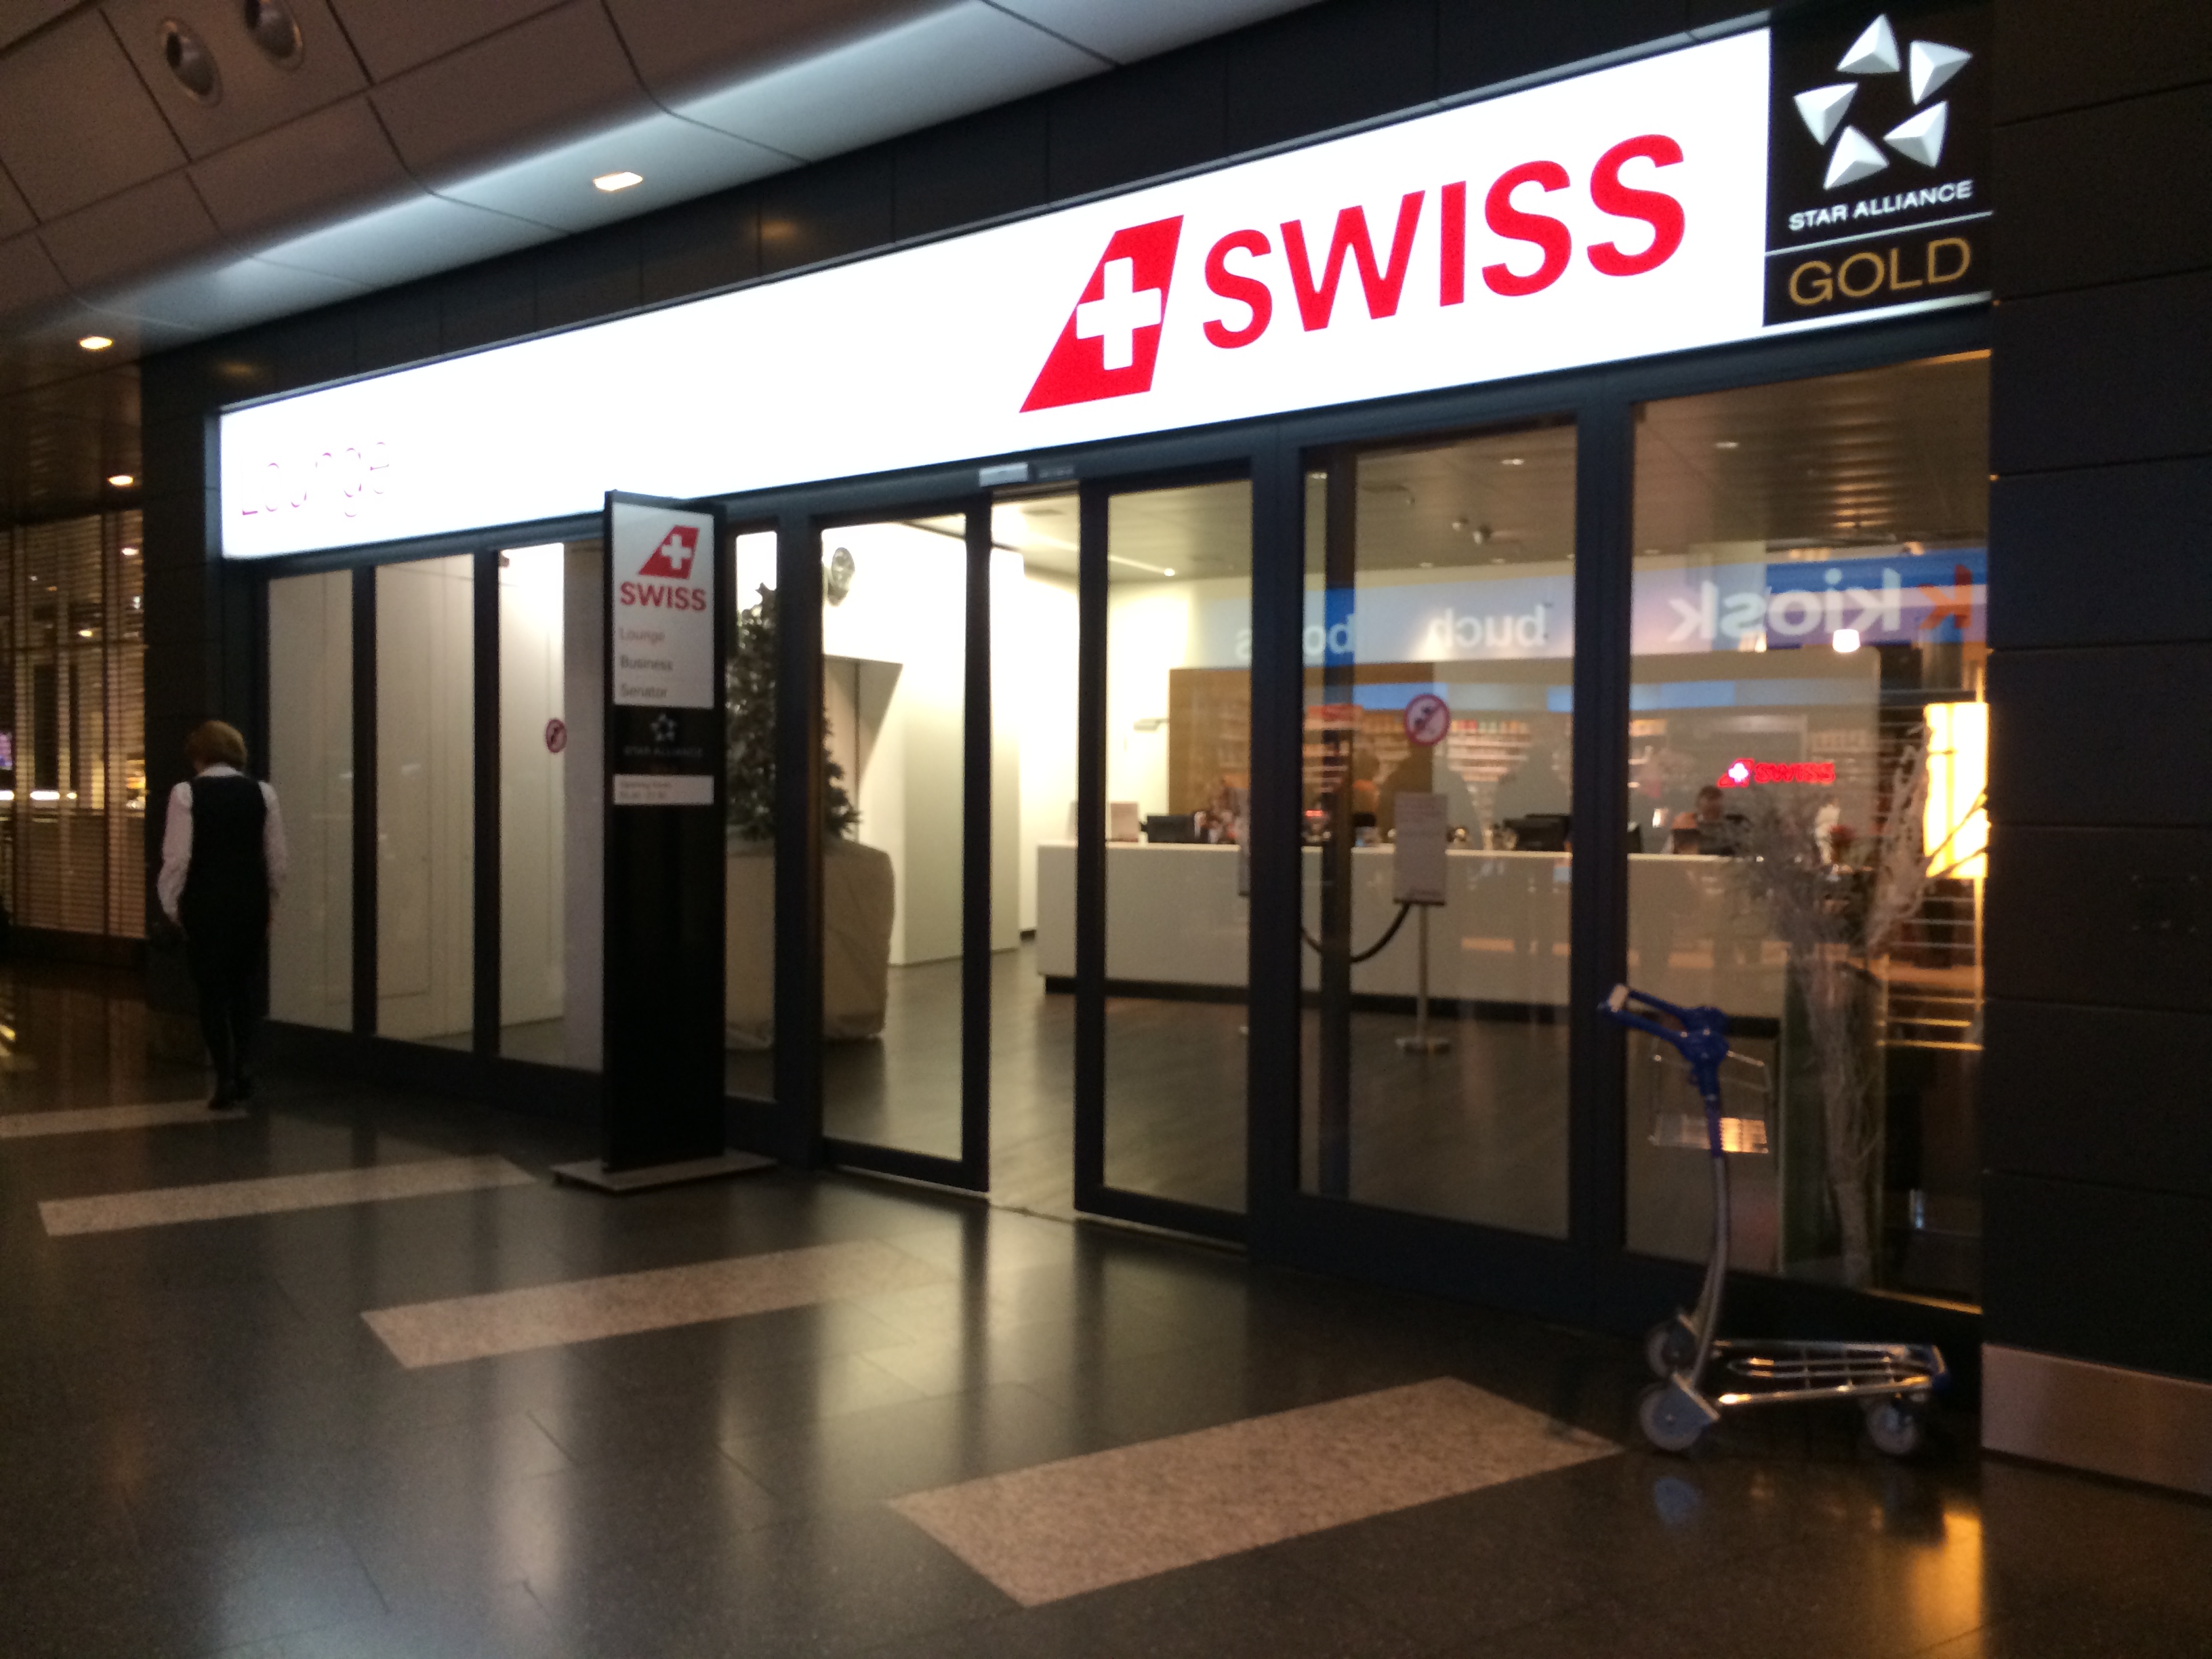 Entrance to the Swiss lounges